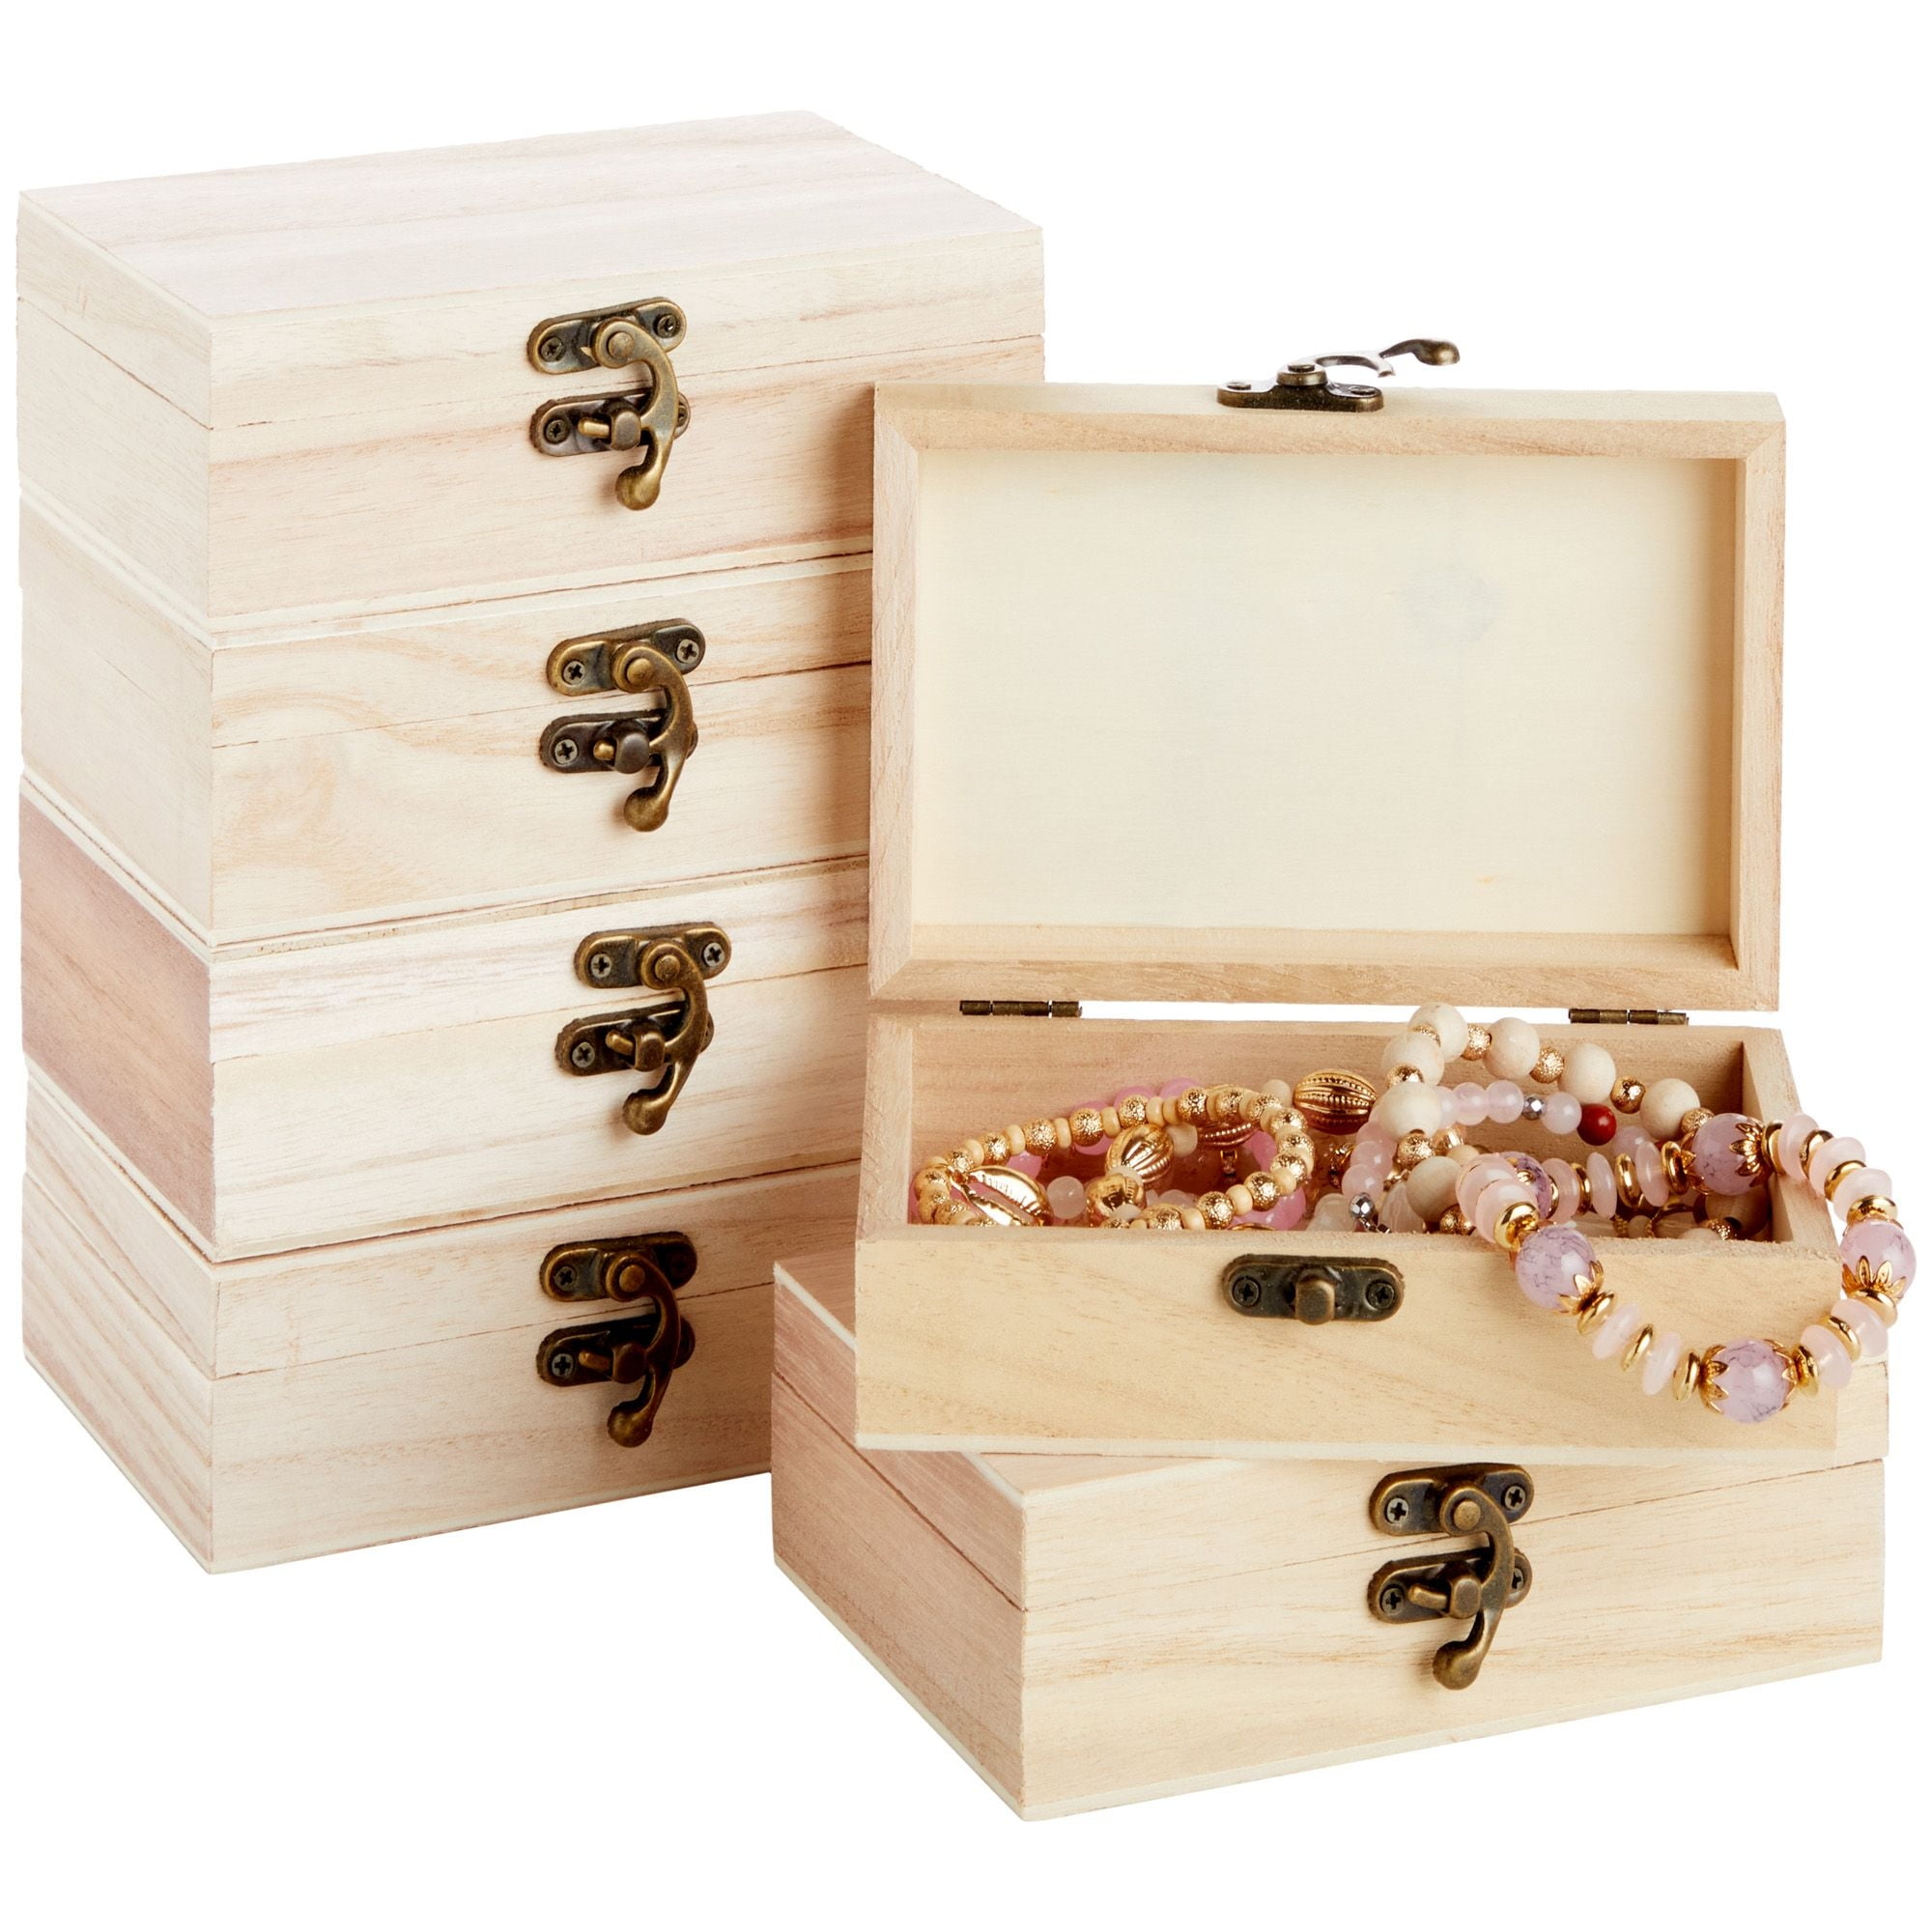 Unfinished Wooden Jewelry Box - 6-Pack Wood Boxes with Locking Clasp